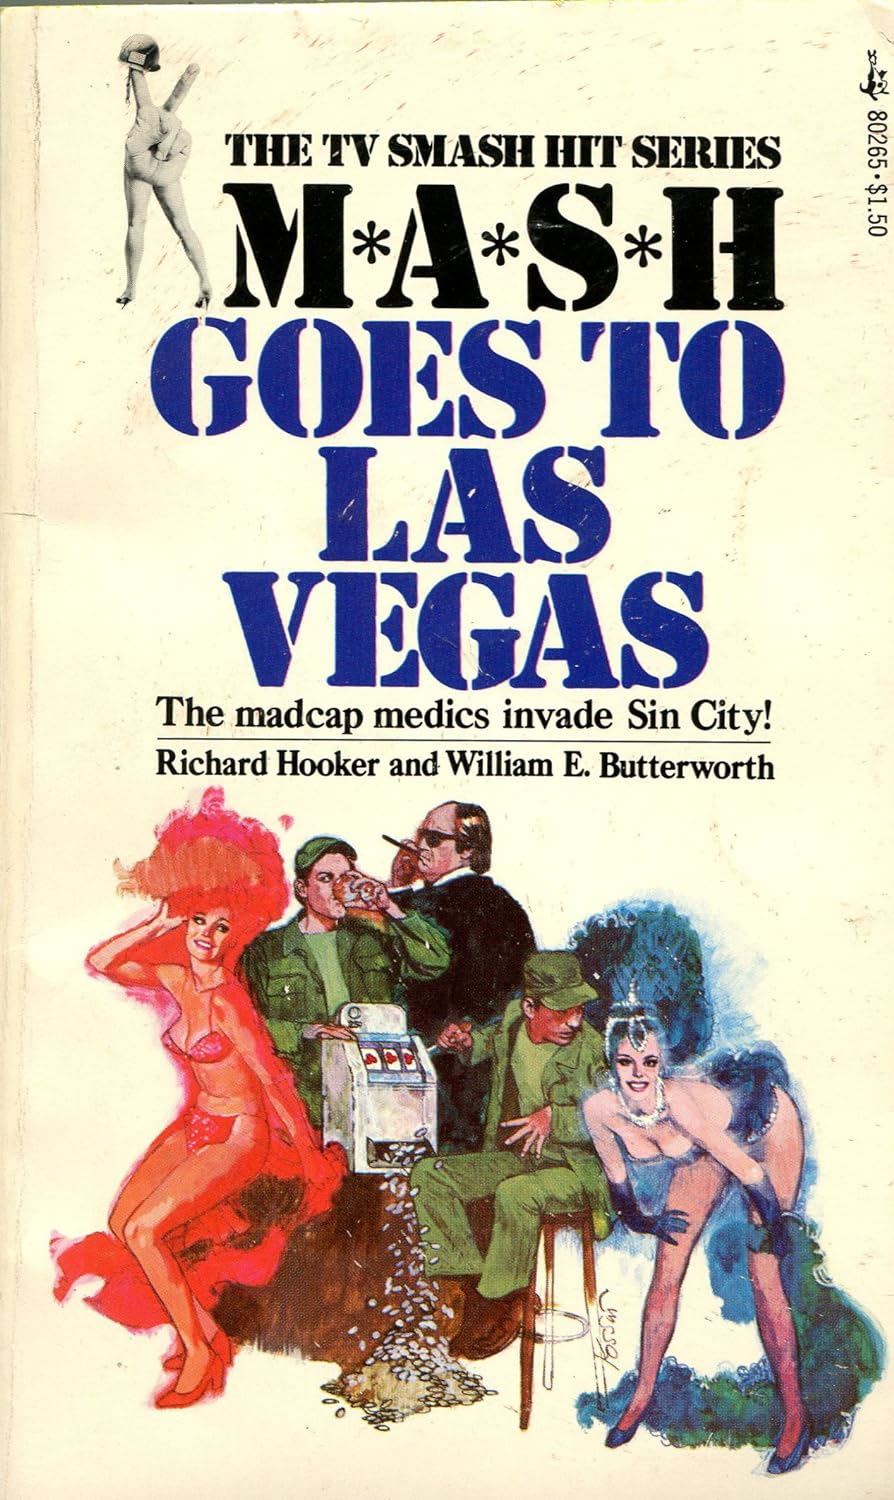 M*A*S*H Goes to Las Vegas